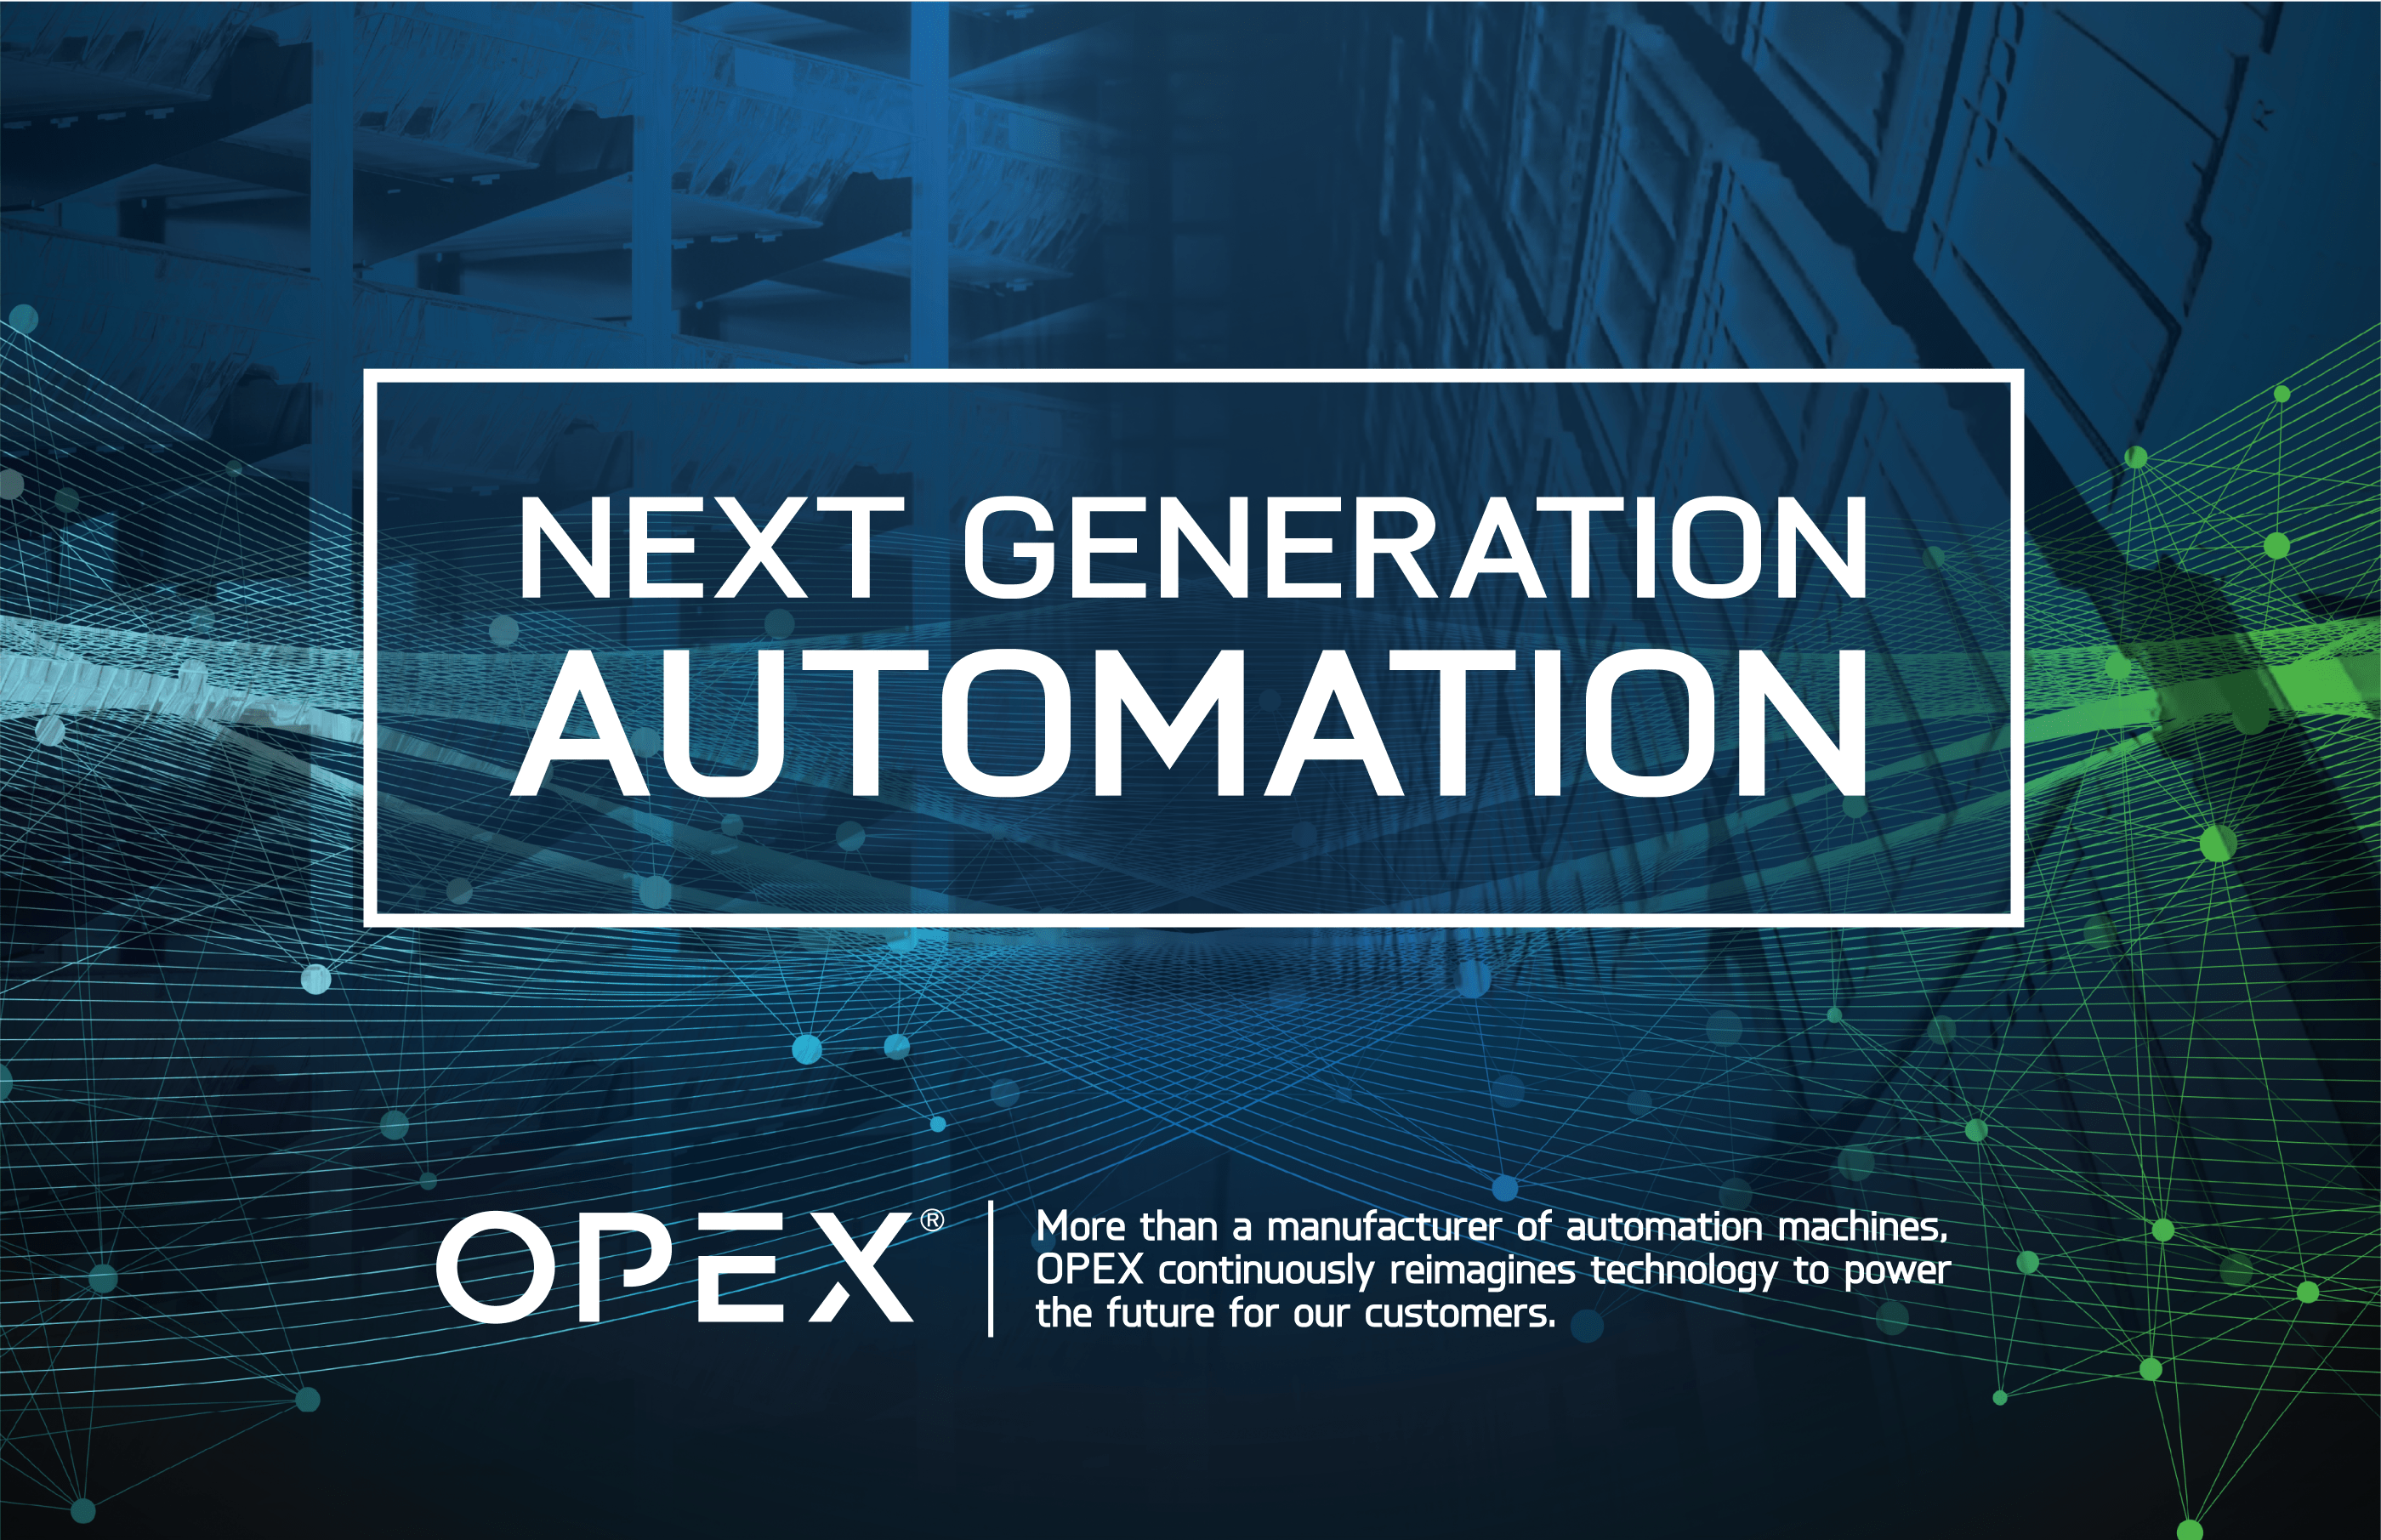 Bailey Brand Consulting OPEX Next Generation Automation. More than a manufacturer of automation machines, OPEX continuously reimagines technology to power the future for our customers.